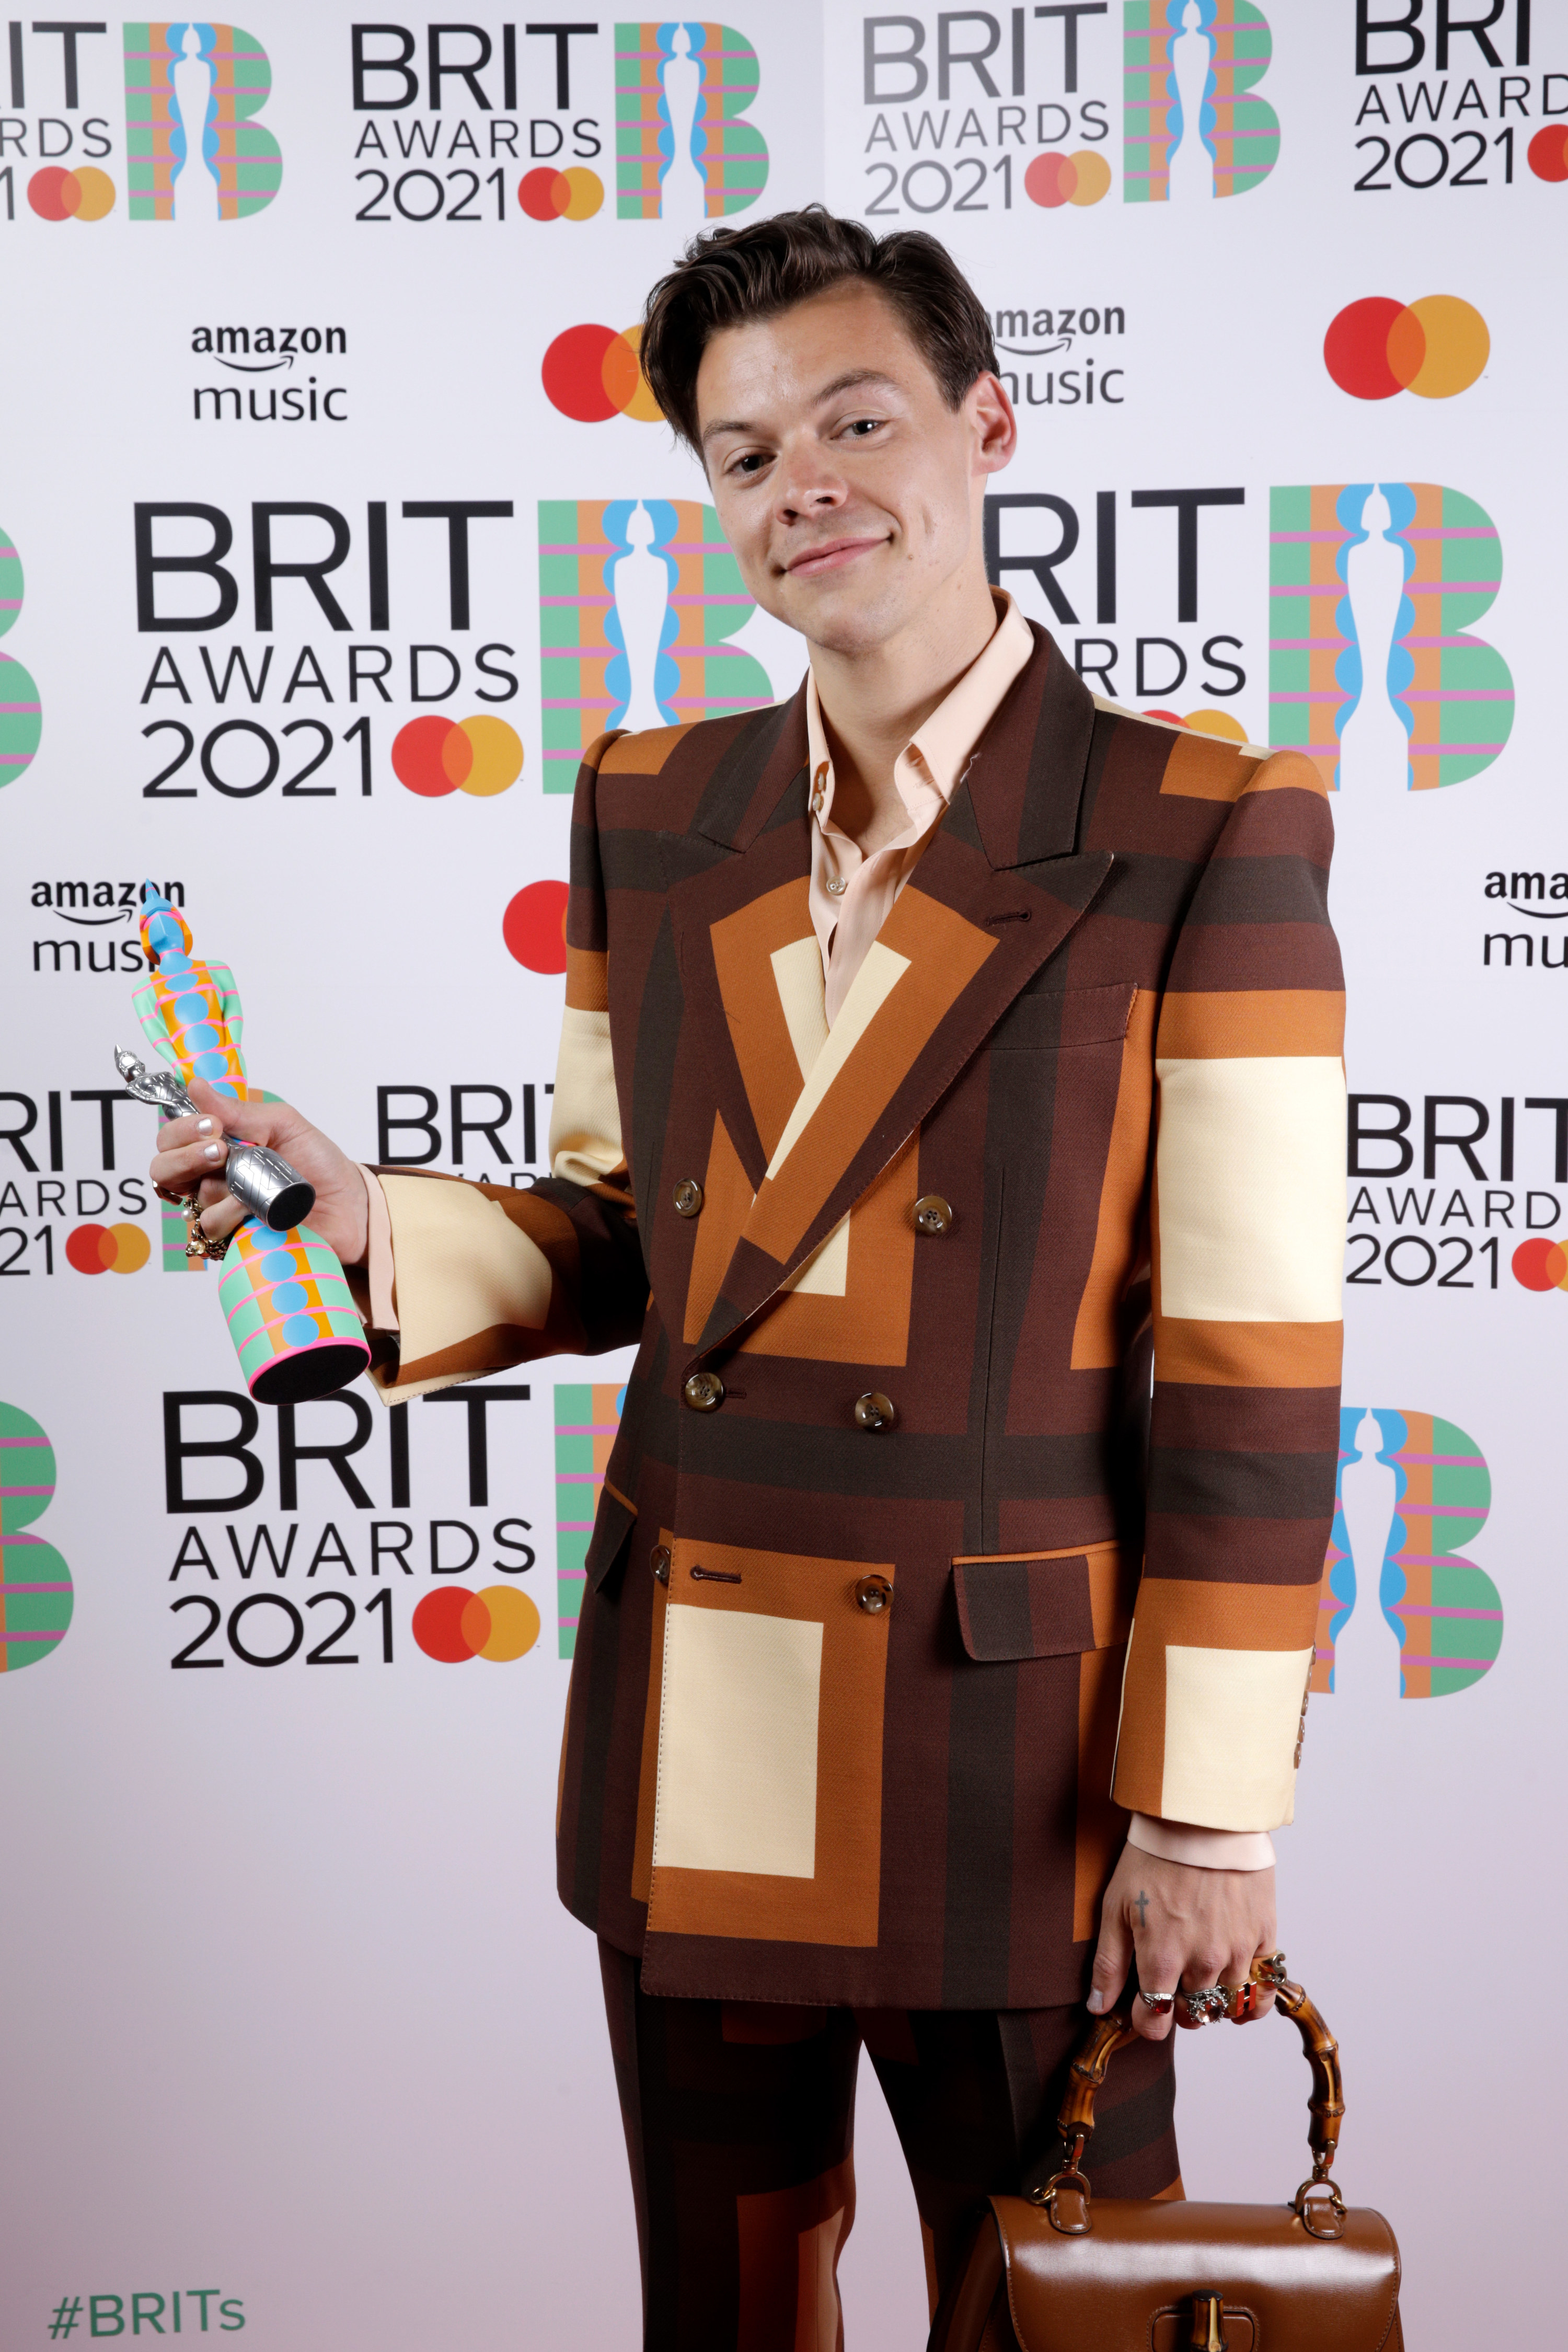 Harry smiling and holding up his award for the Brit Awards 2021